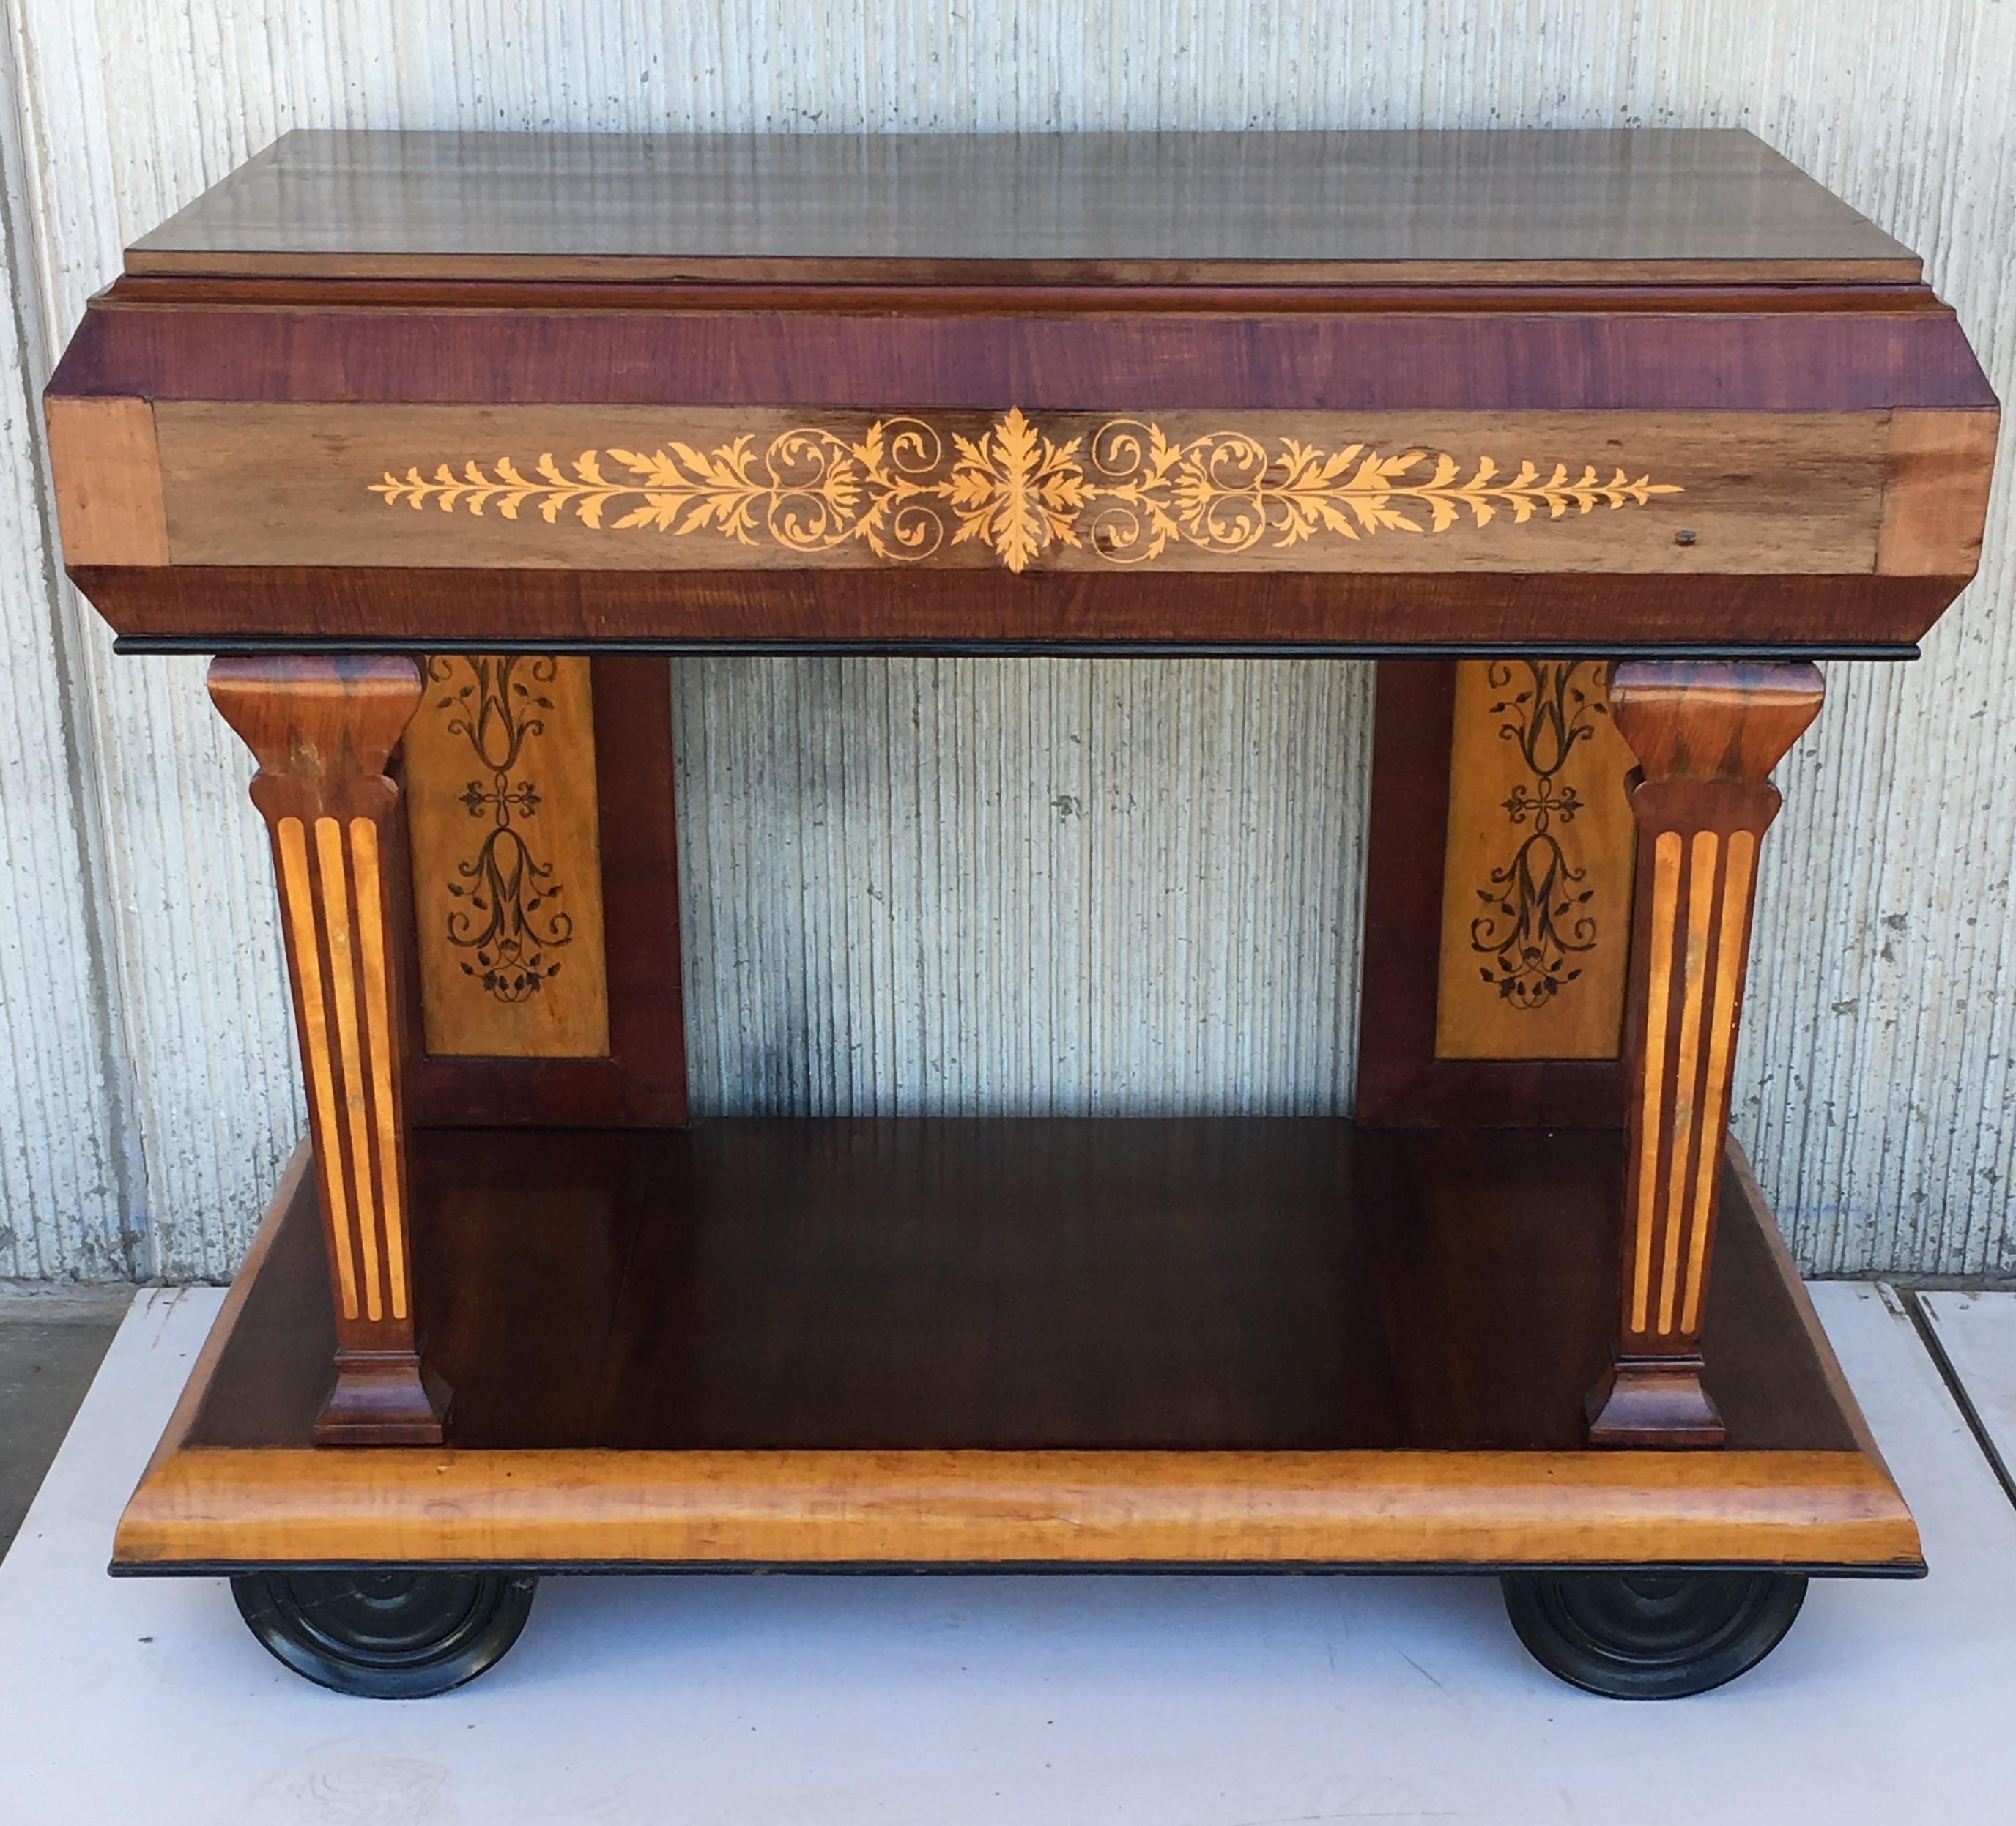 Early 19th century console in rosewood and maple. It features beautiful marquetry of rinceaux and floral motifs. It is resting on two straight legs in the back and two front columns legs. The console is set on a large base .
Charles X period.